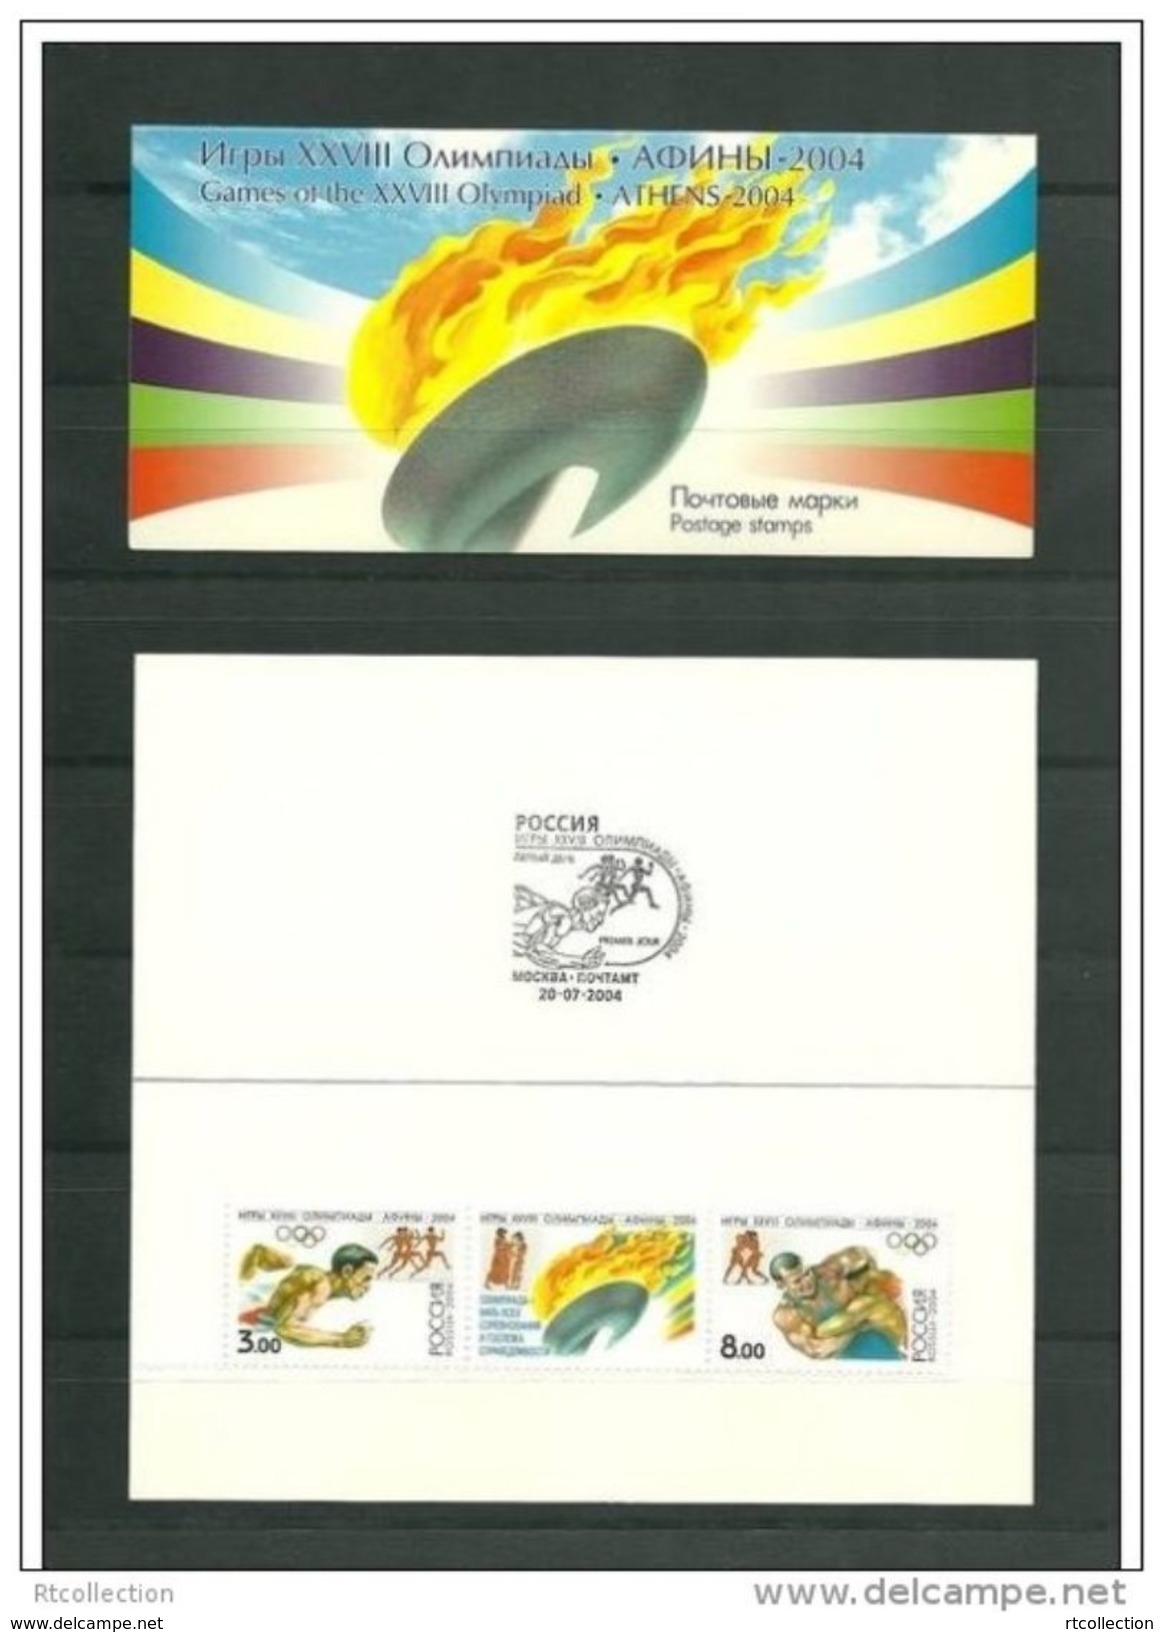 Russia 2004 Booklet Summer Olympic Game Athens Sports Running Wrestling Olympiad Flame Greek Poem Art Stamps Mi 1190-91 - Collections